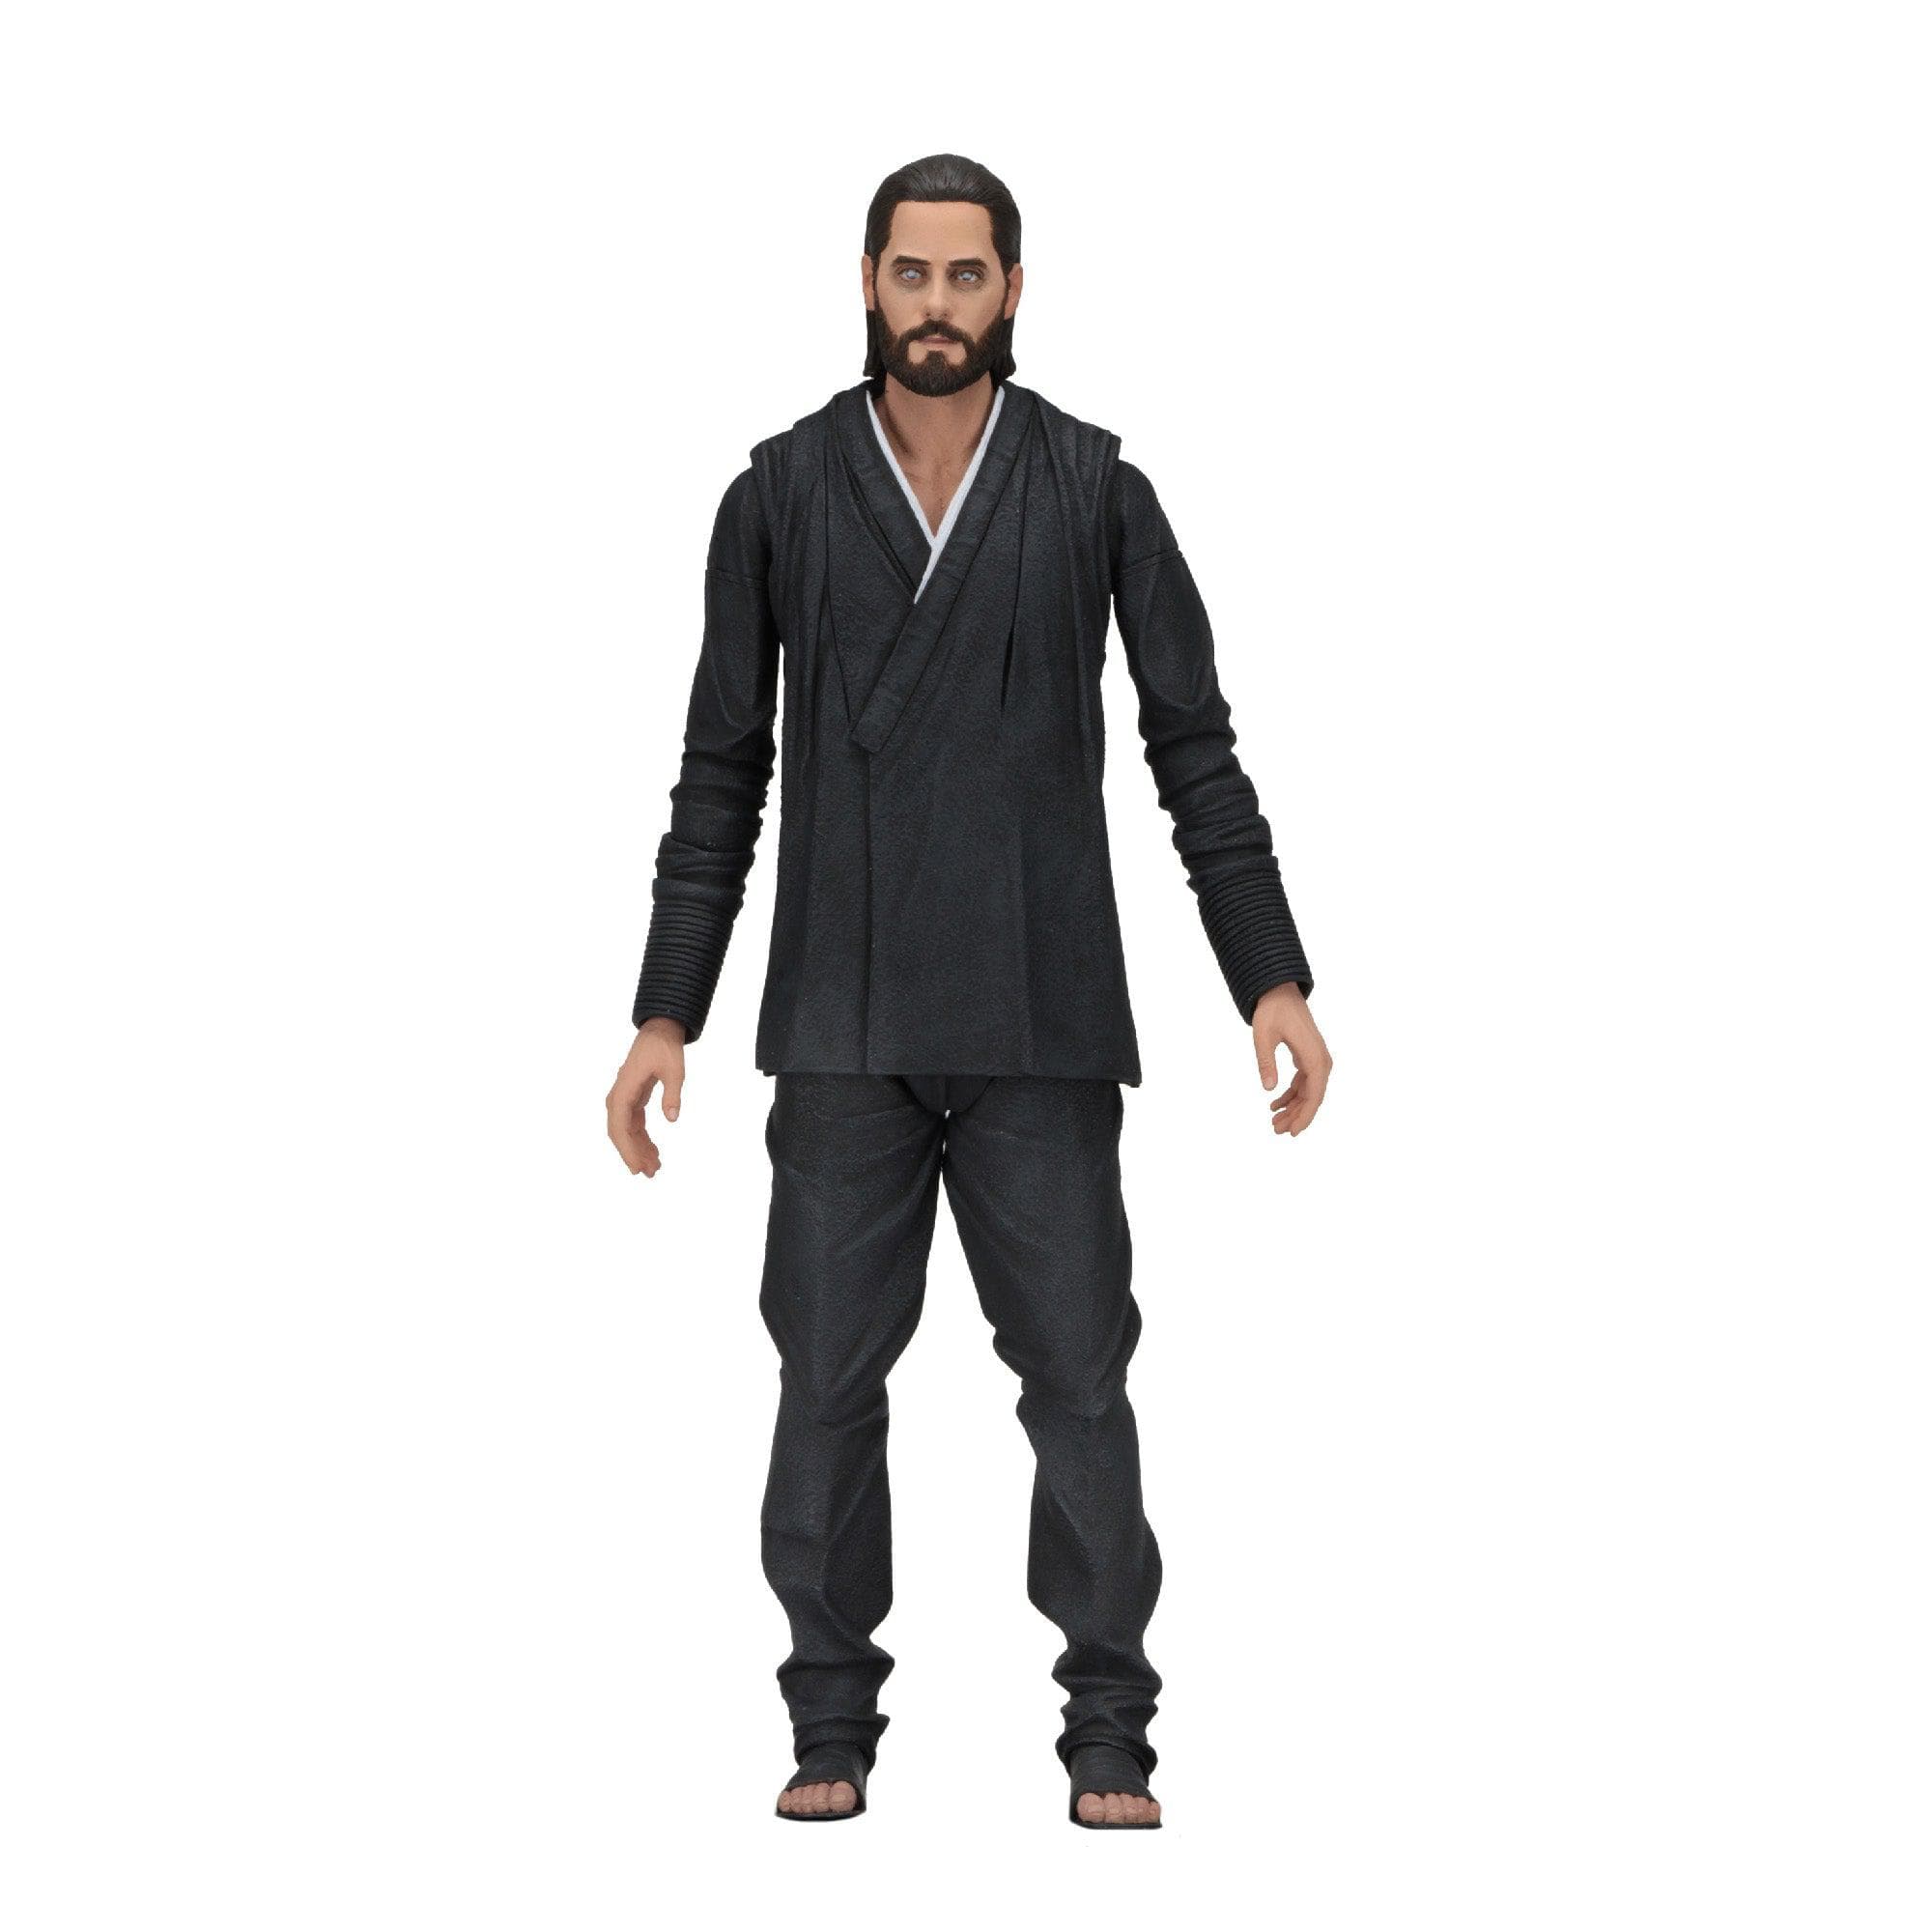 NECA - Blade Runner 2049 - 7" Scale Action Figure - Series 2 Wallace - costumes.com